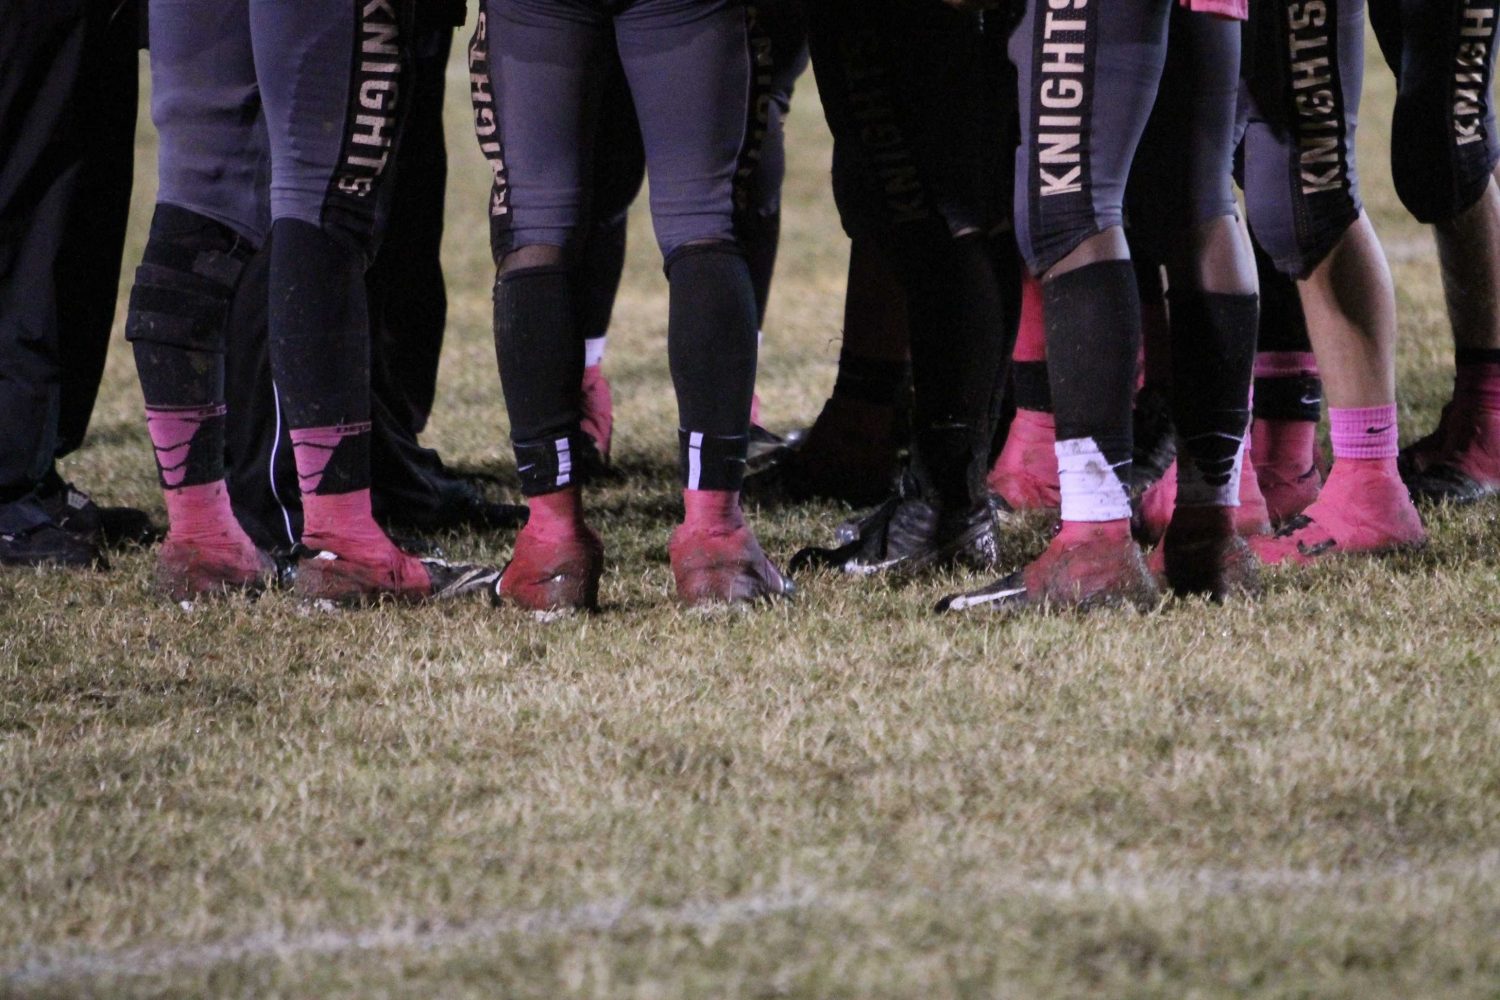 Varsity football teams sports their pink socks in support of breast cancer awareness at annual Pink Out game October 5, 2012.